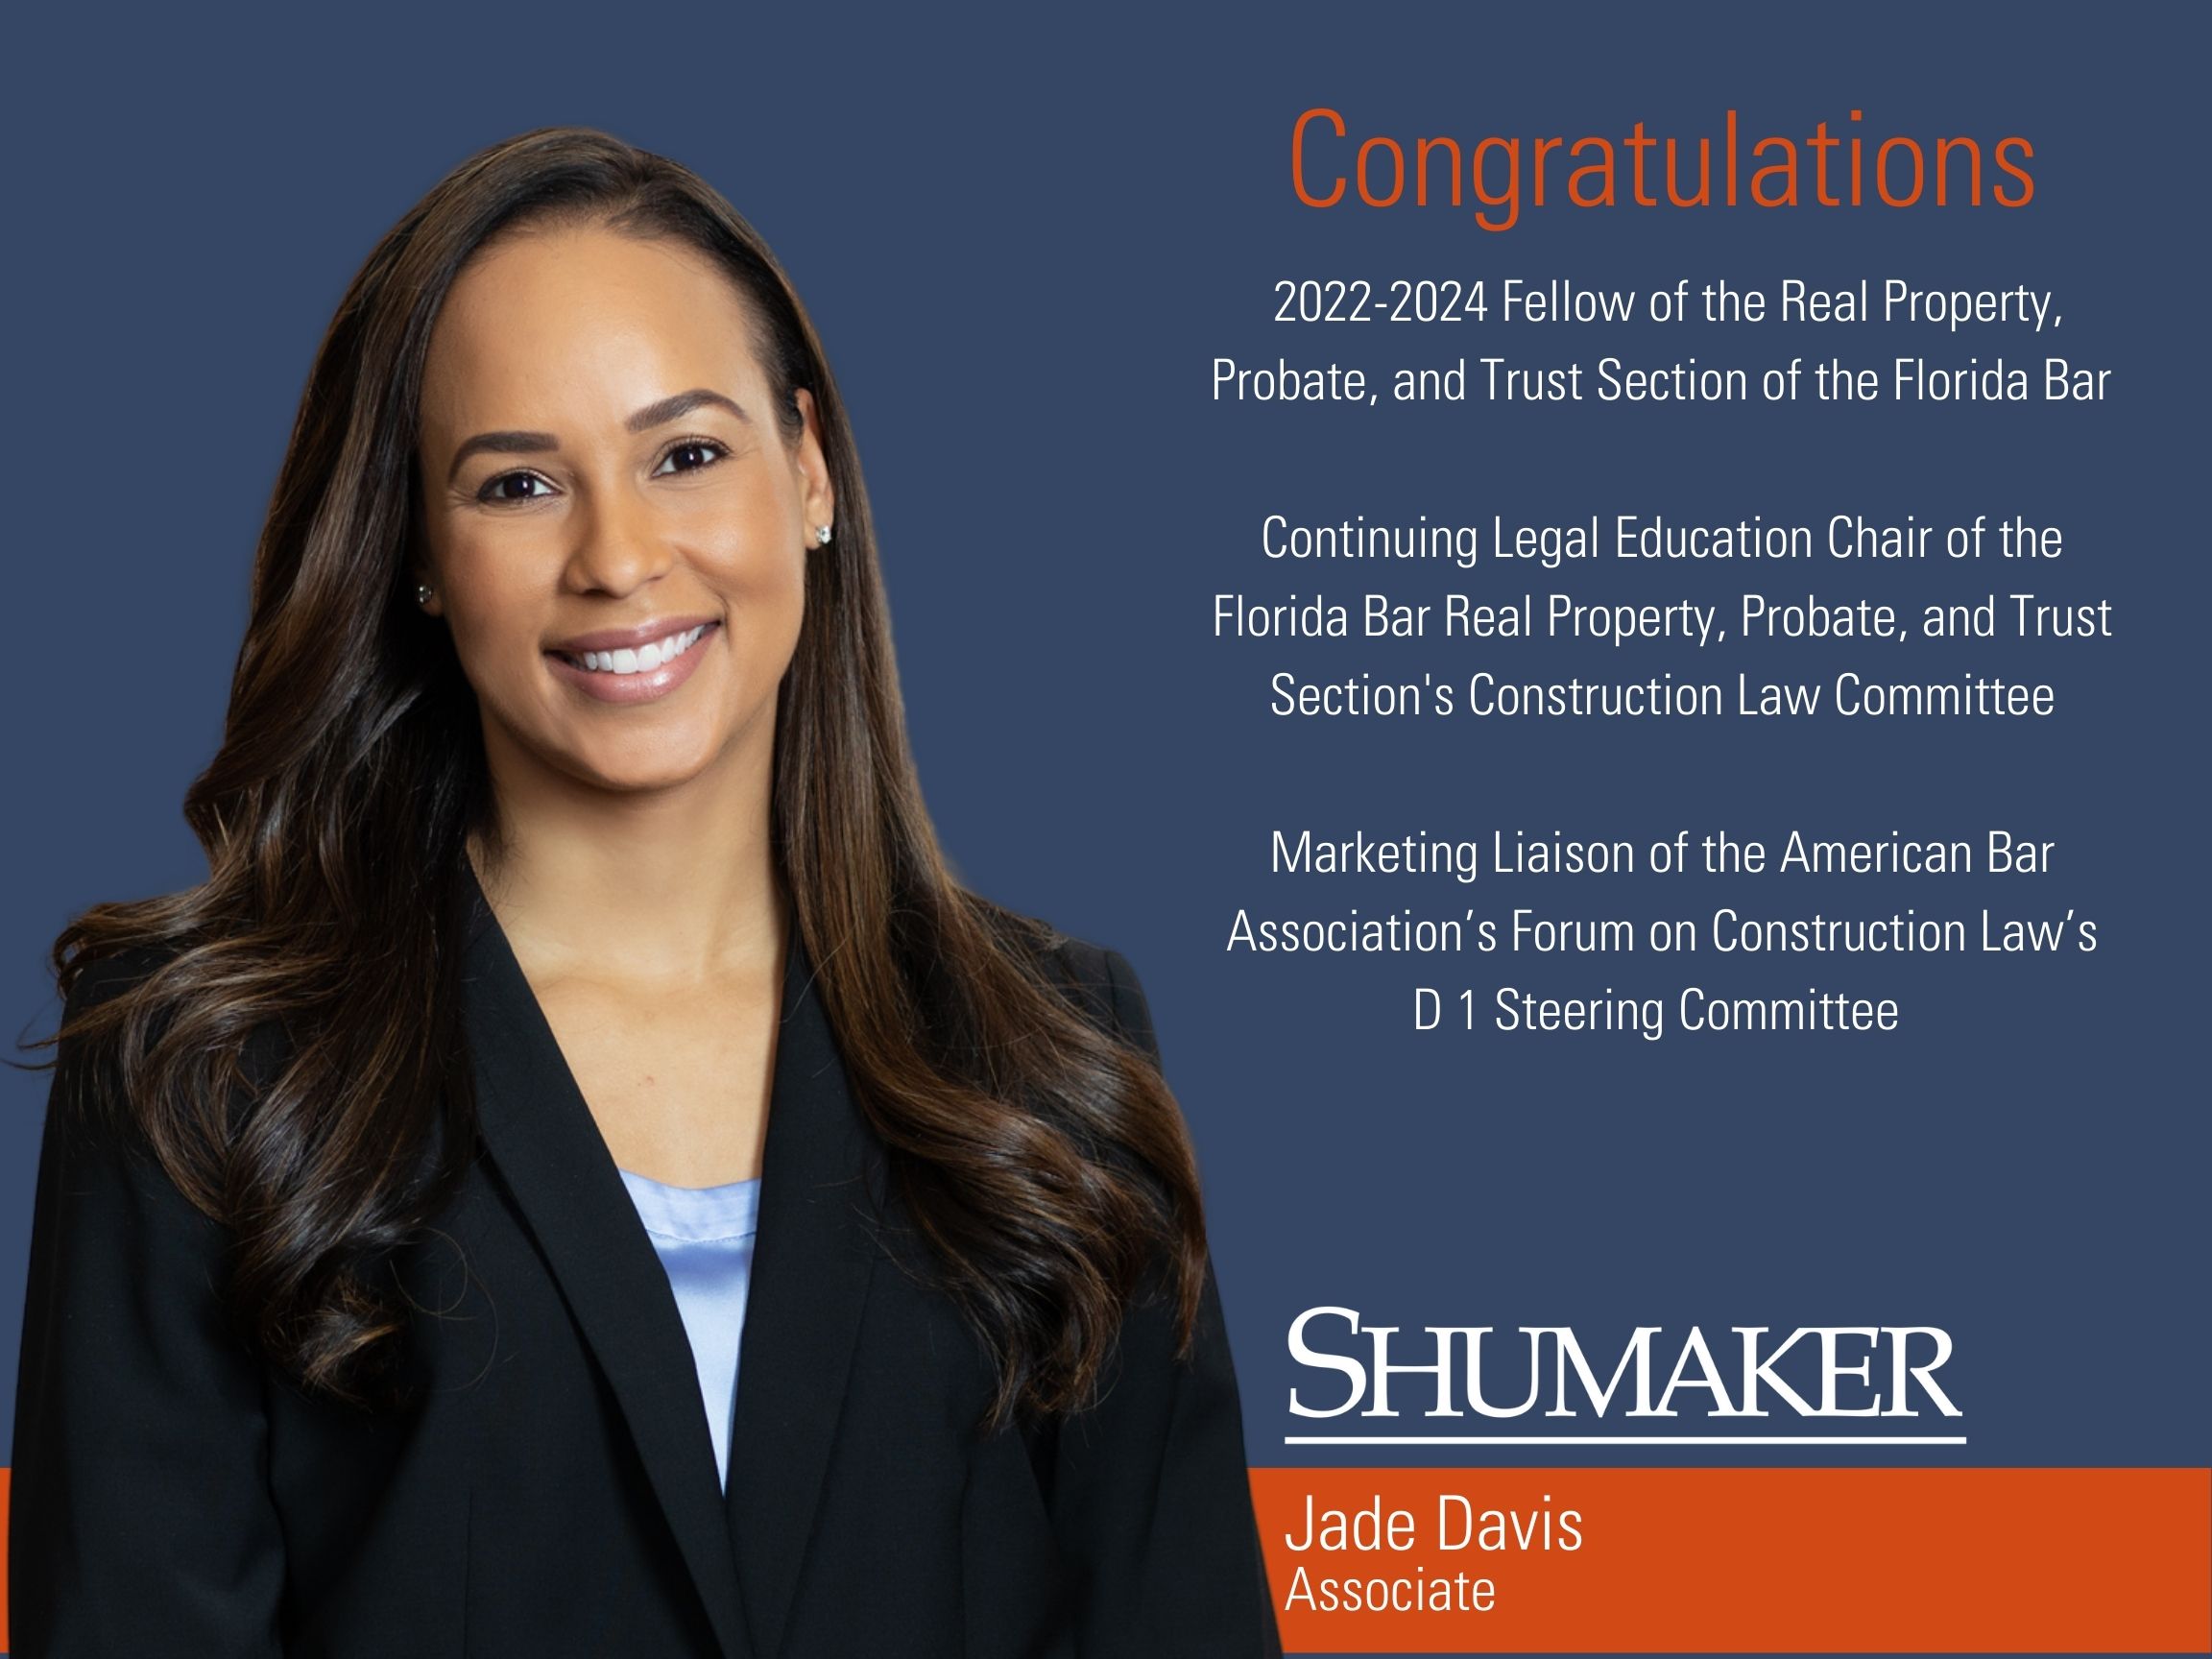 Shumaker’s Jade Davis Appointed to Two Committees Committed to Education in Construction Law